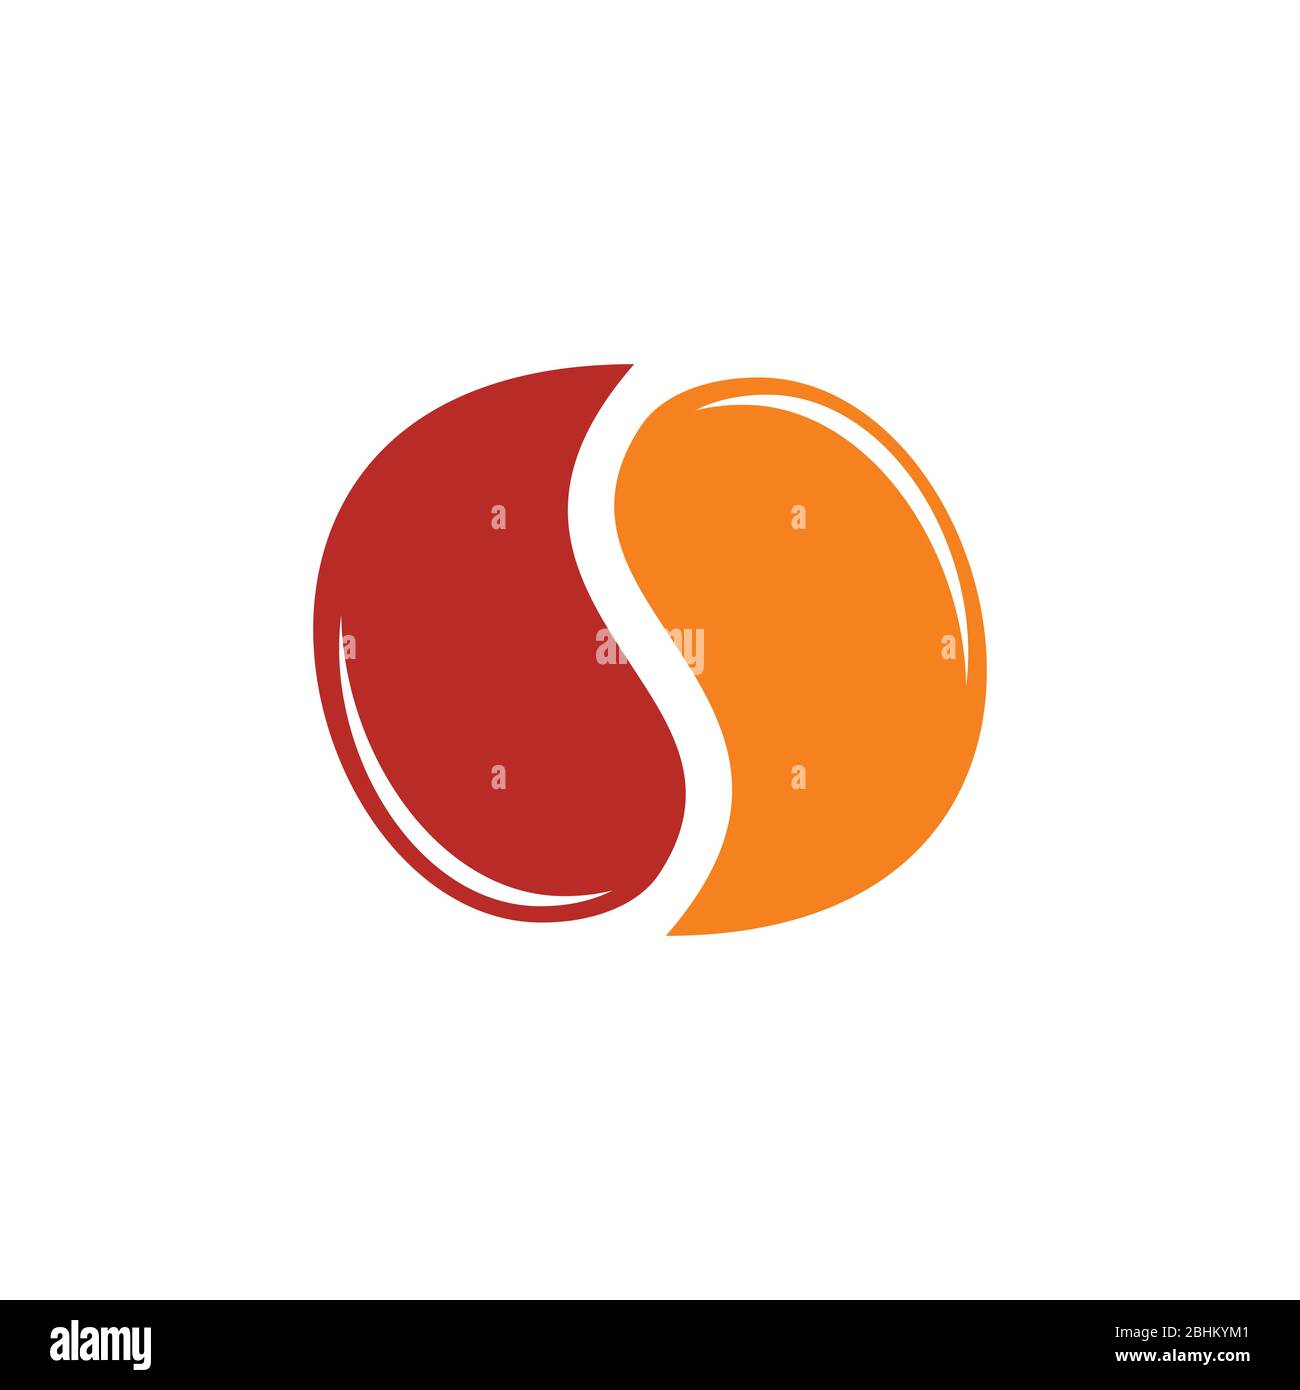 abstract letter s coffee water drink logo vector Stock Vector